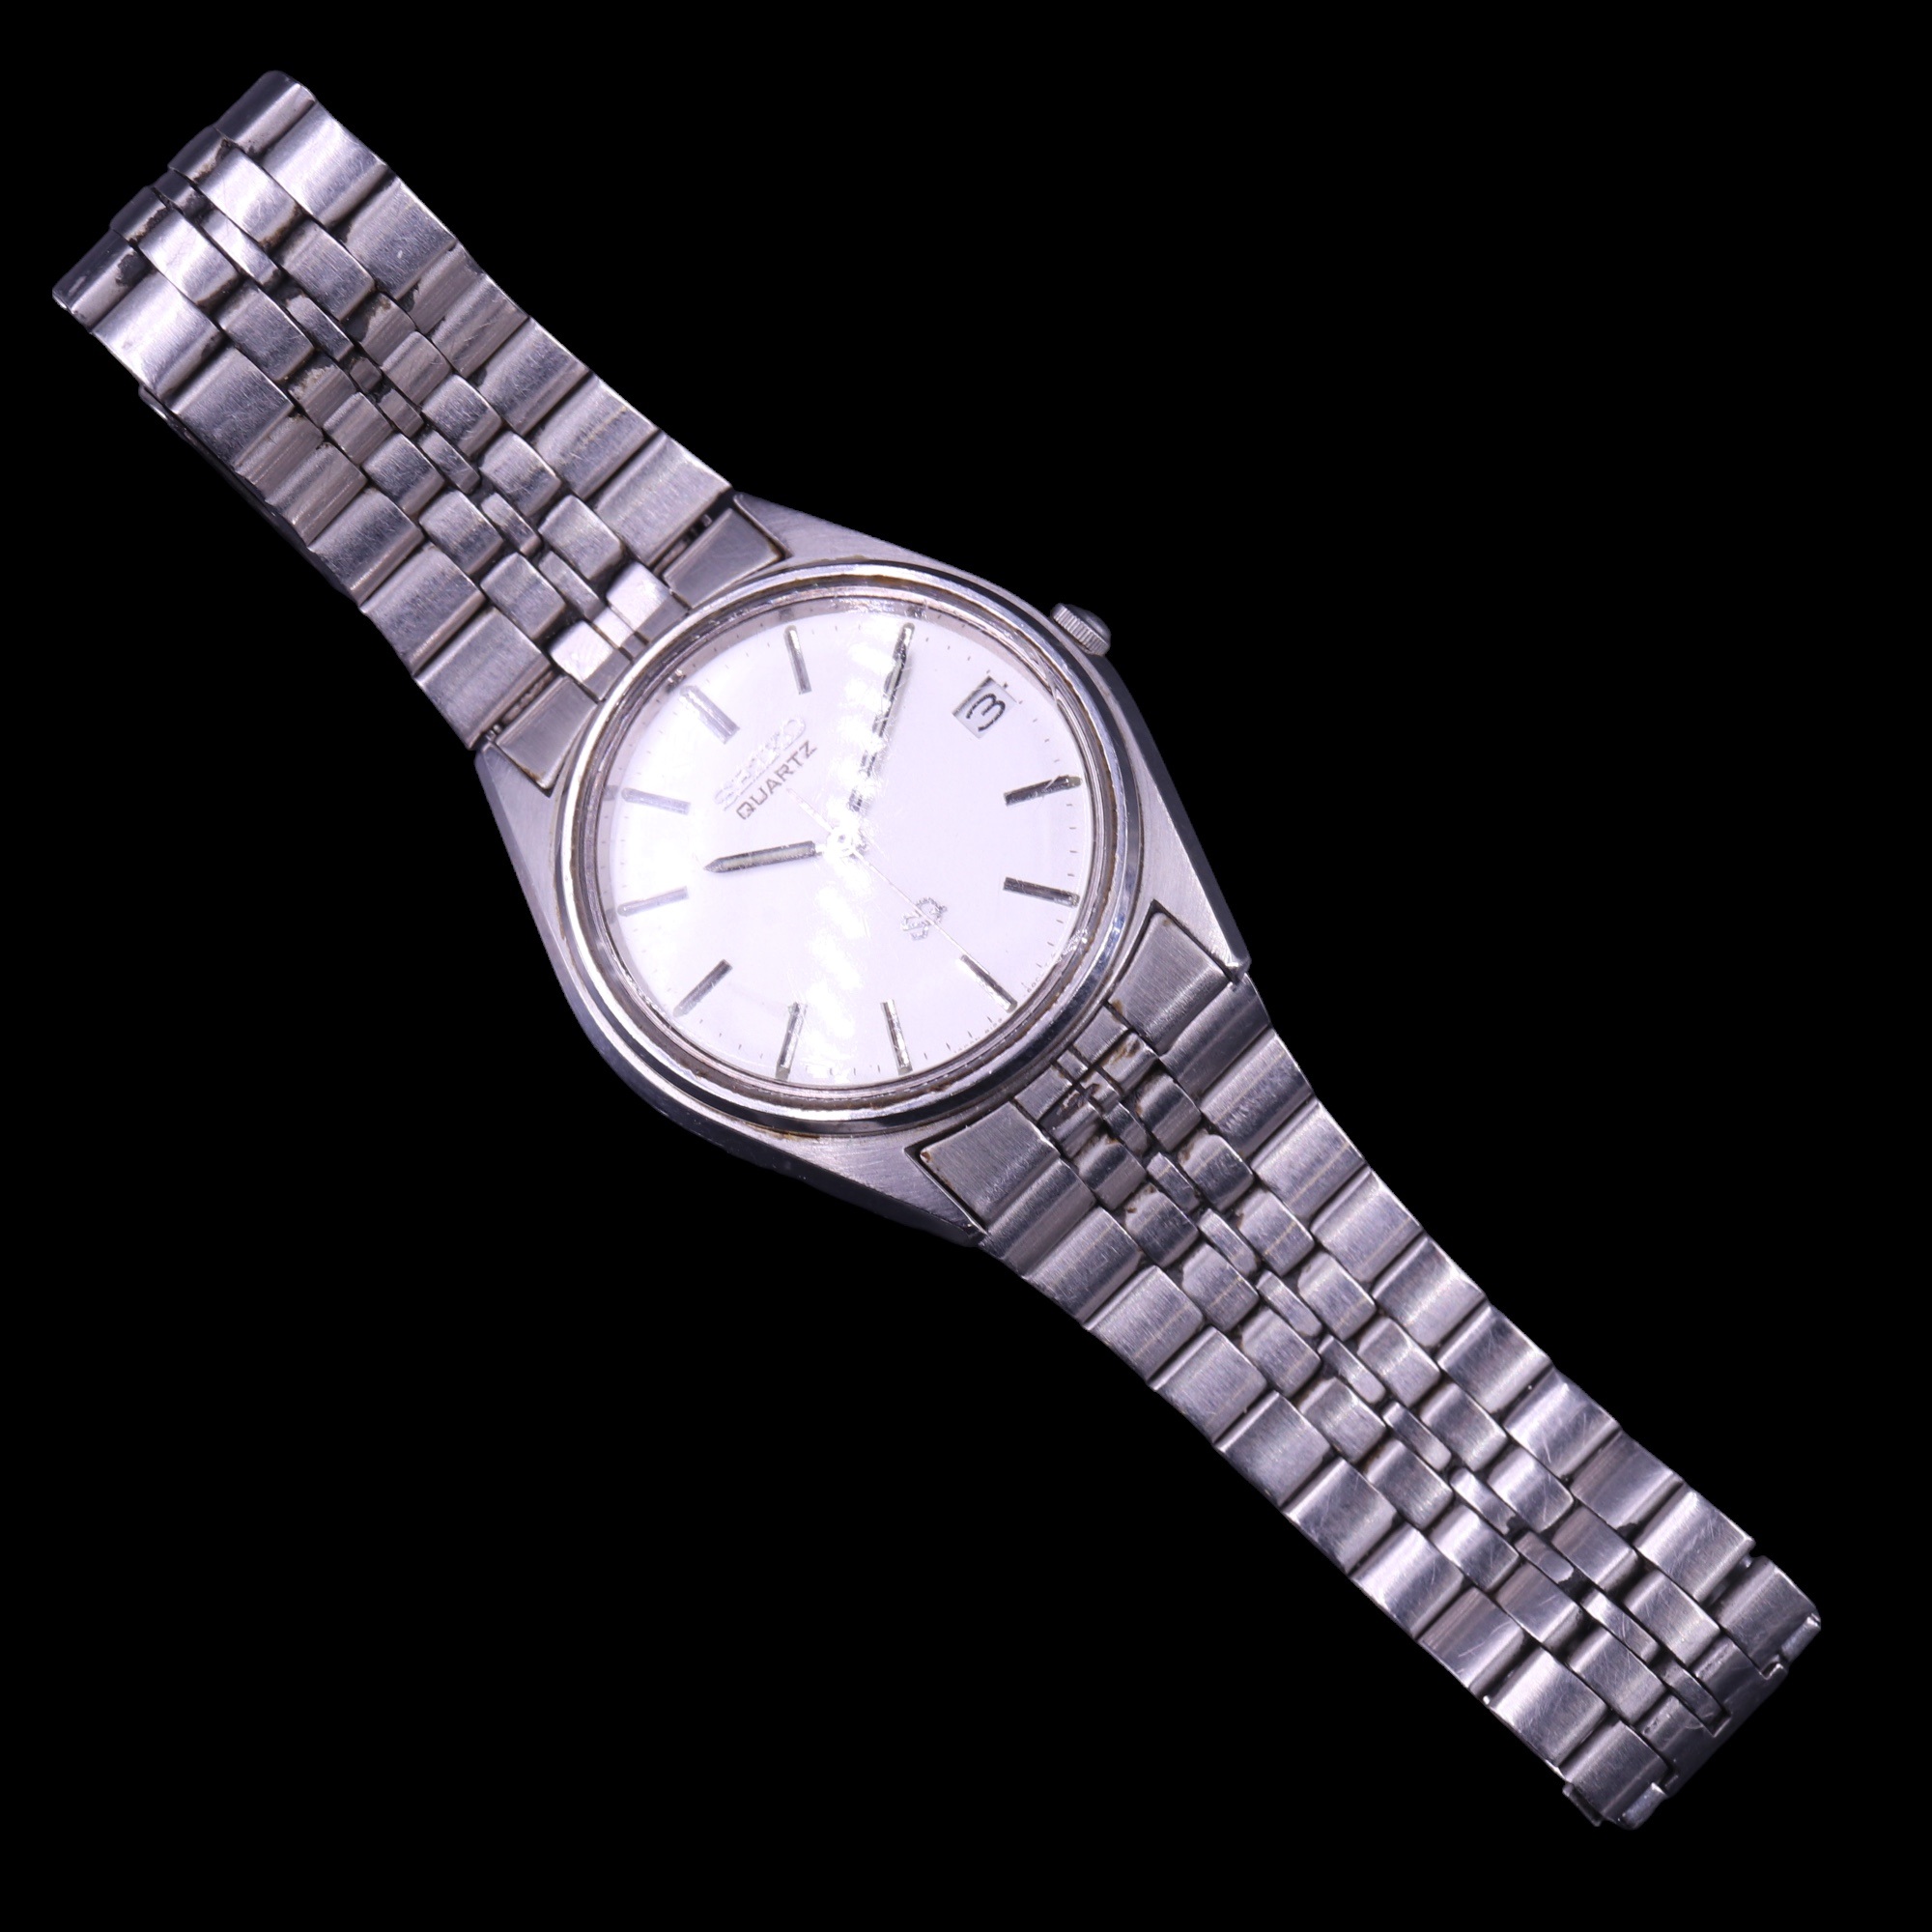 A vintage Seiko SQ stainless steel wristwatch, having a calibre 8122 quartz movement, silver face, - Image 2 of 4